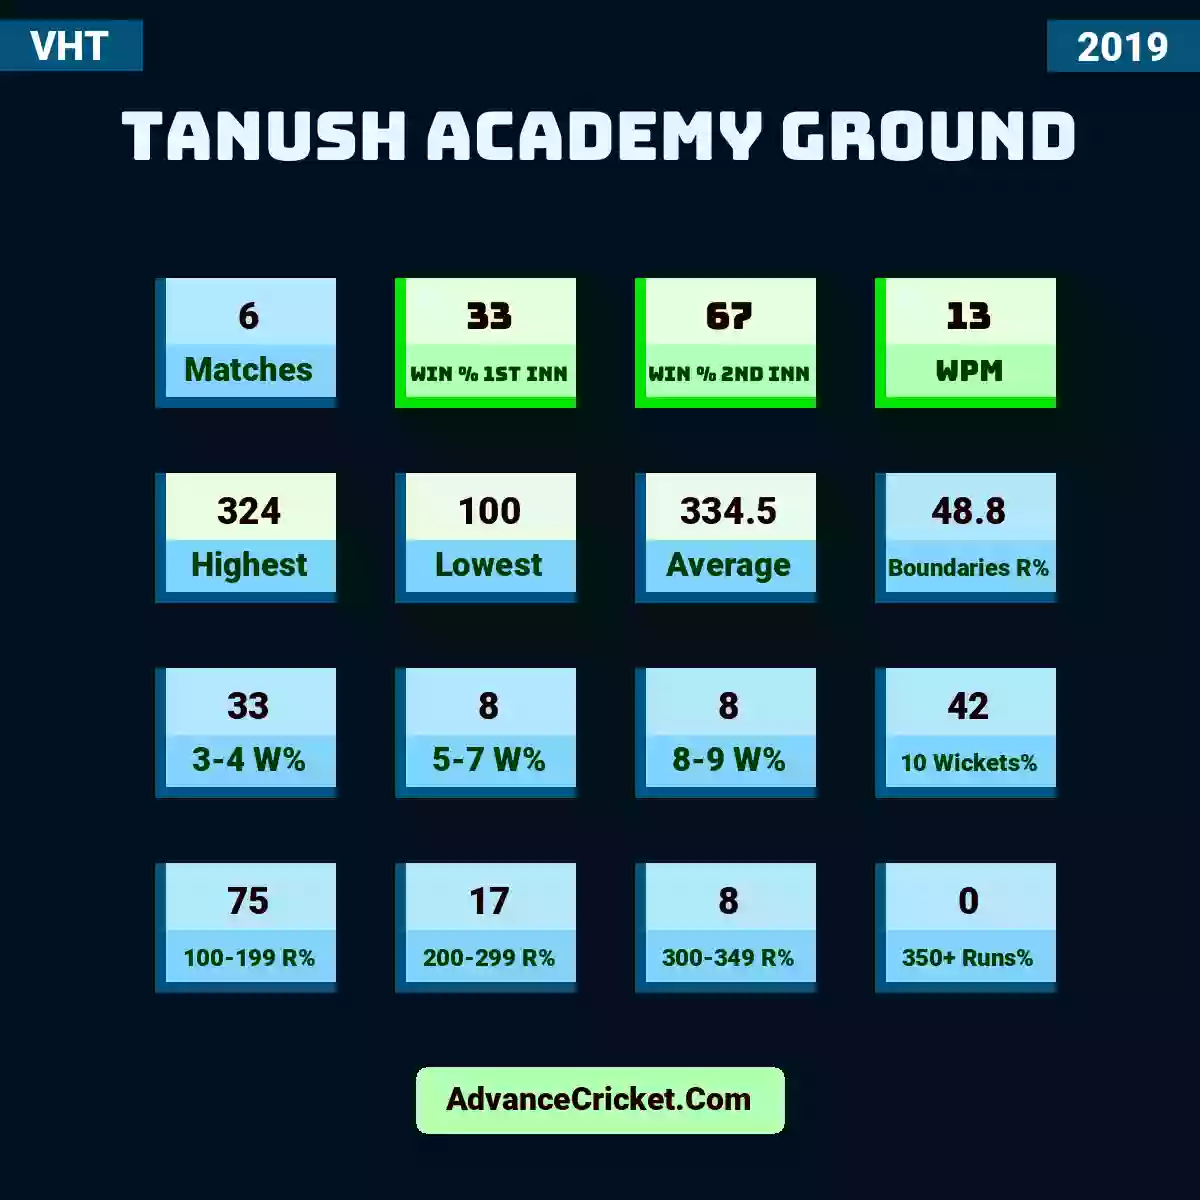 Image showing Tanush Academy Ground with Matches: 6, Win % 1st Inn: 33, Win % 2nd Inn: 67, WPM: 13, Highest: 324, Lowest: 100, Average: 334.5, Boundaries R%: 48.8, 3-4 W%: 33, 5-7 W%: 8, 8-9 W%: 8, 10 Wickets%: 42, 100-199 R%: 75, 200-299 R%: 17, 300-349 R%: 8, 350+ Runs%: 0.